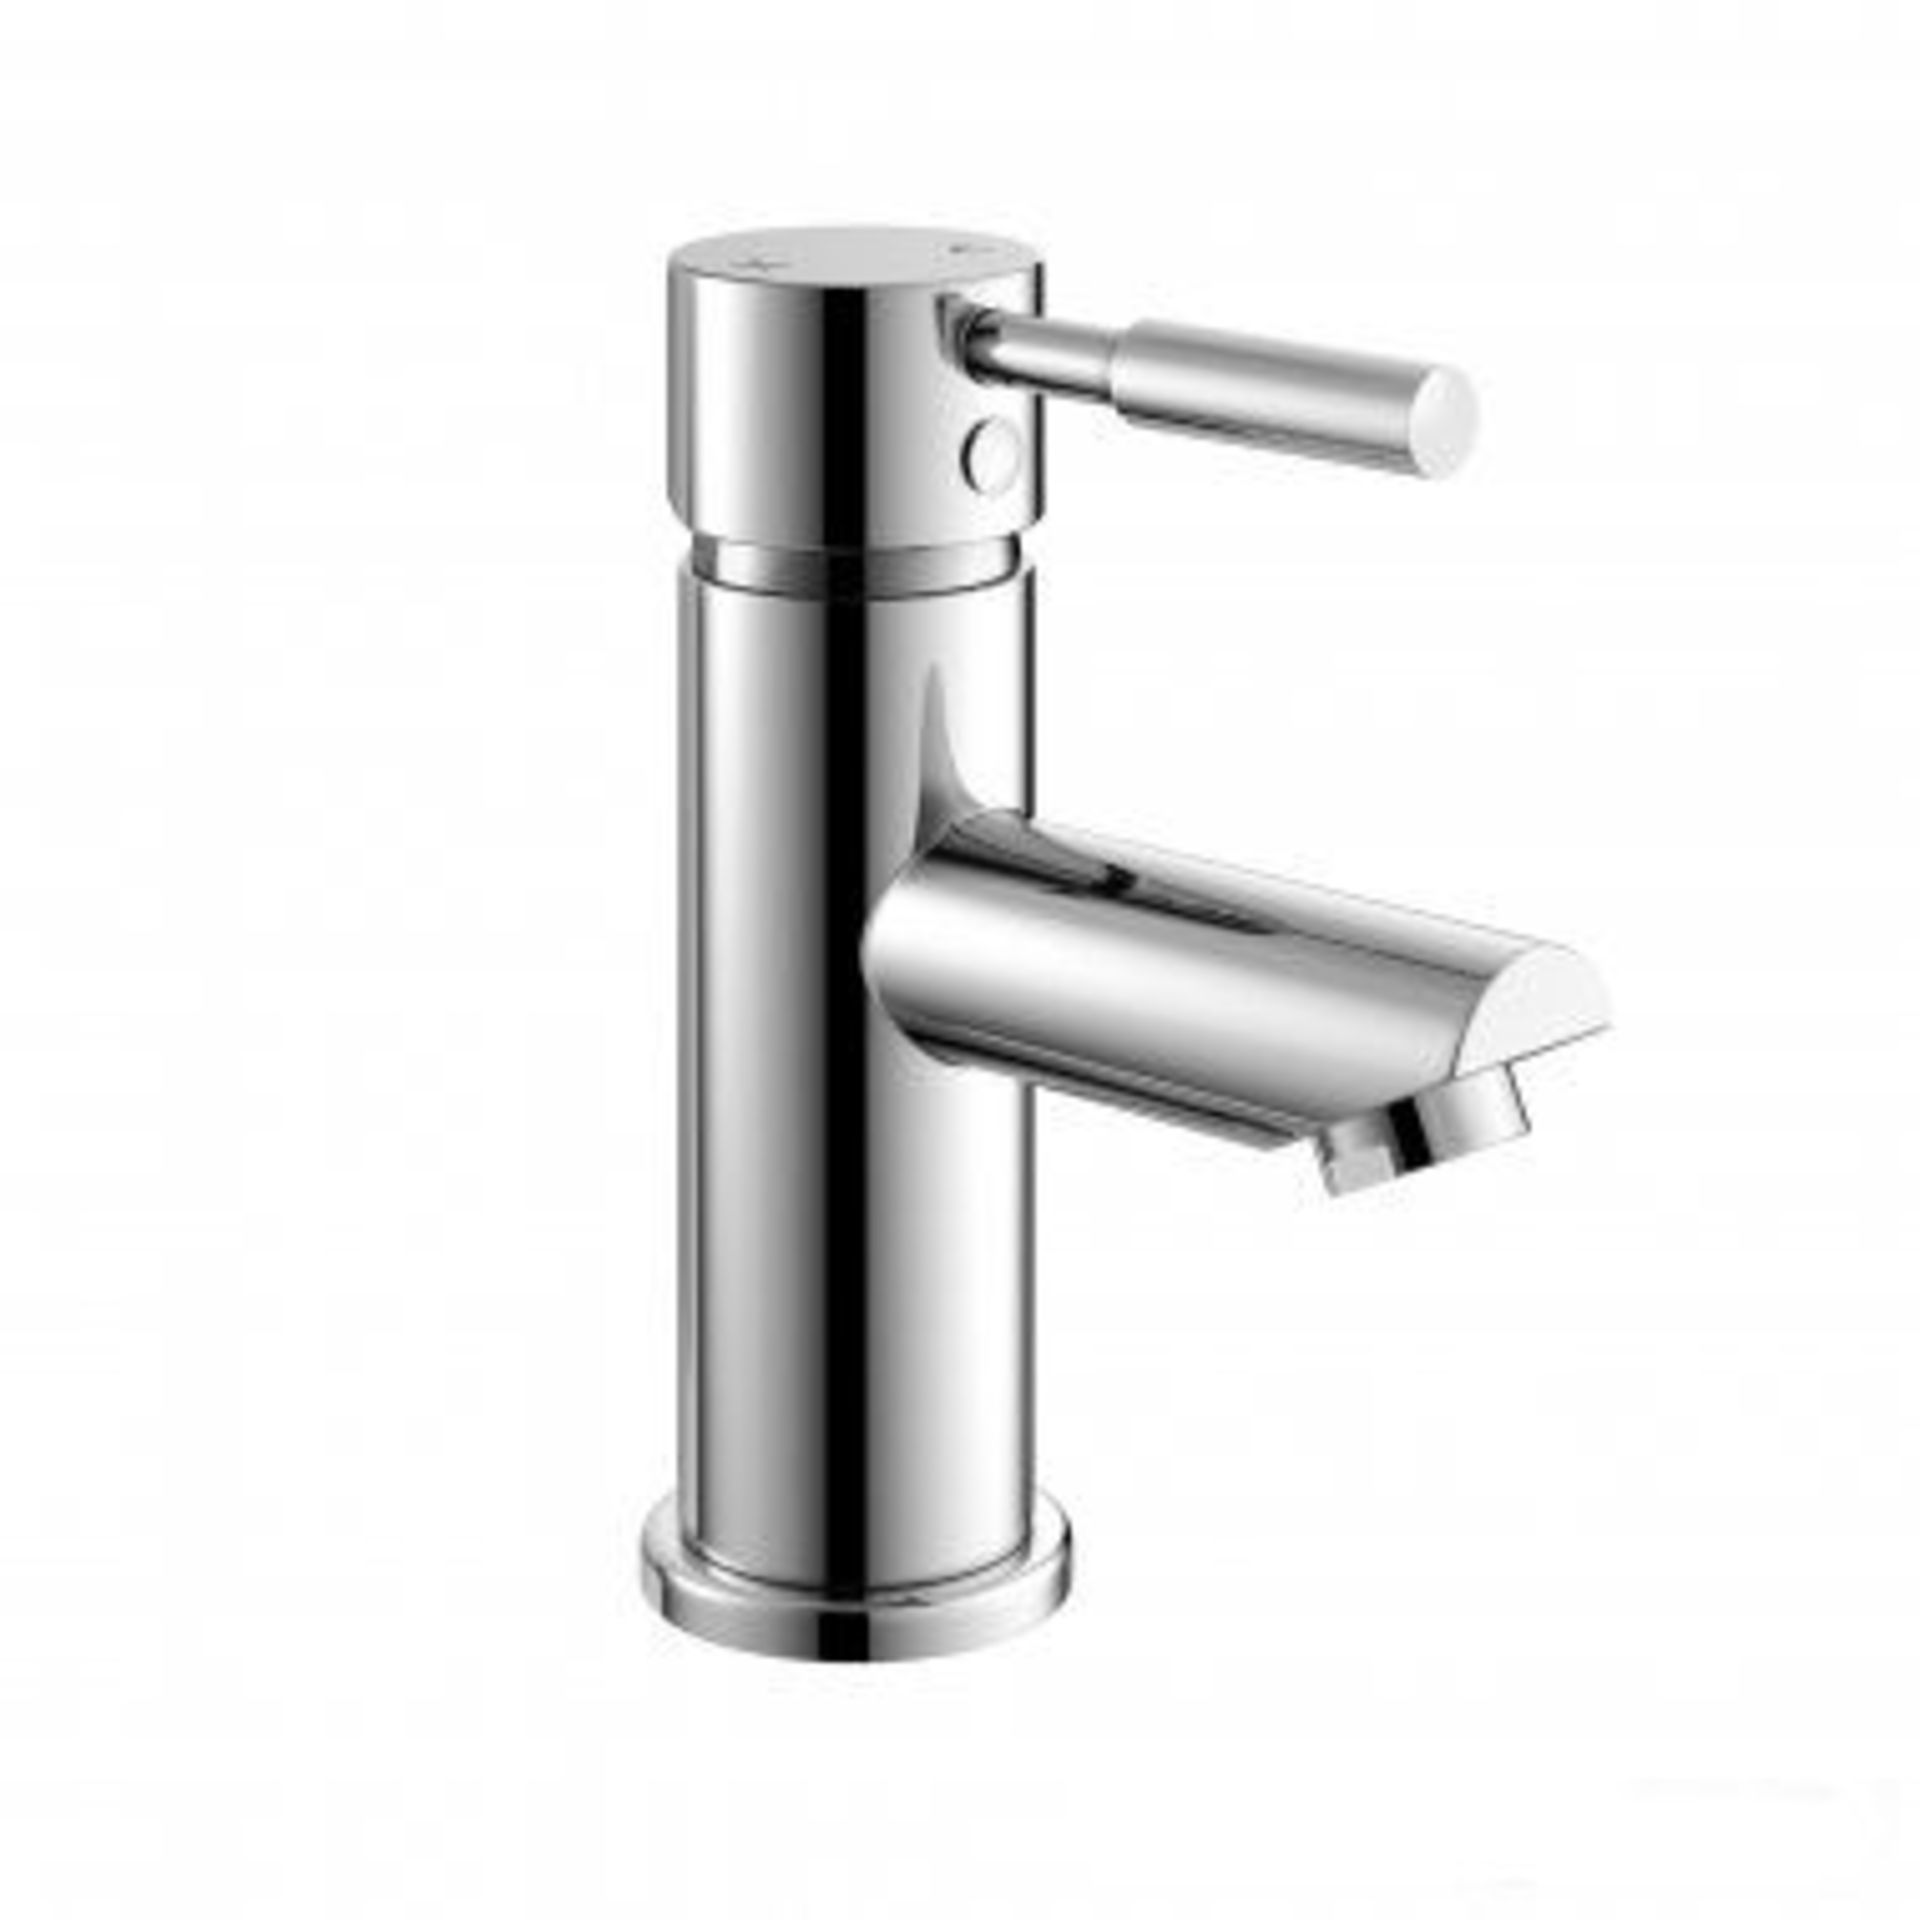 New & Boxed Gladstone Basin Mixer Tap. Tb2013.Chrome Plated Solid Brass Mirror Finish Simple In... - Image 2 of 2